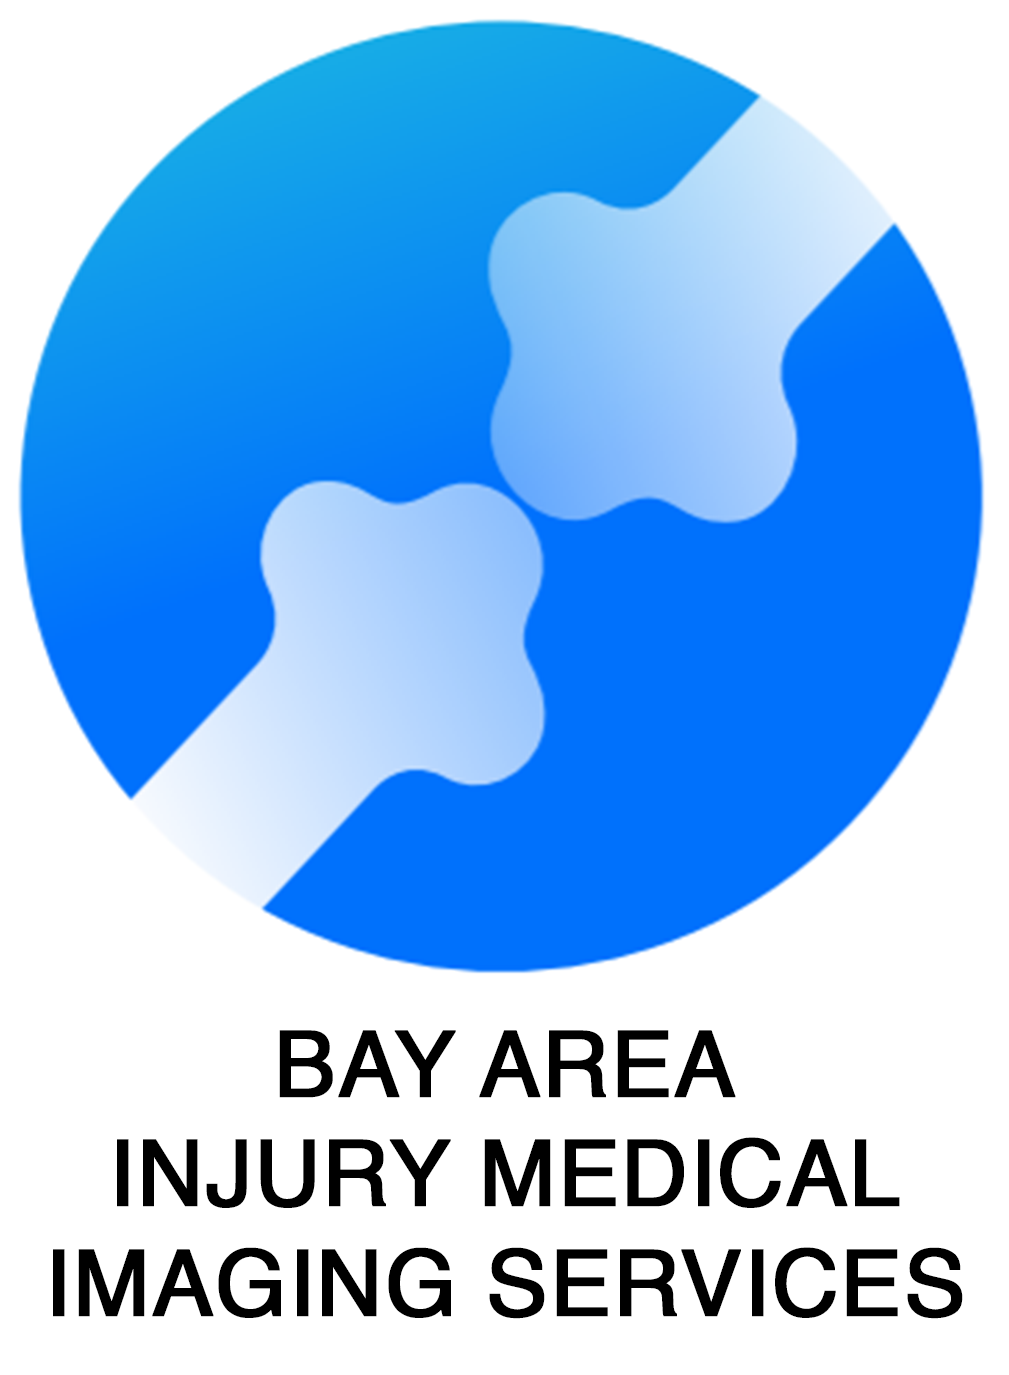 BAY AREA INJURY MEDICAL IMAGING SERVICES (REDWOOD CITY)